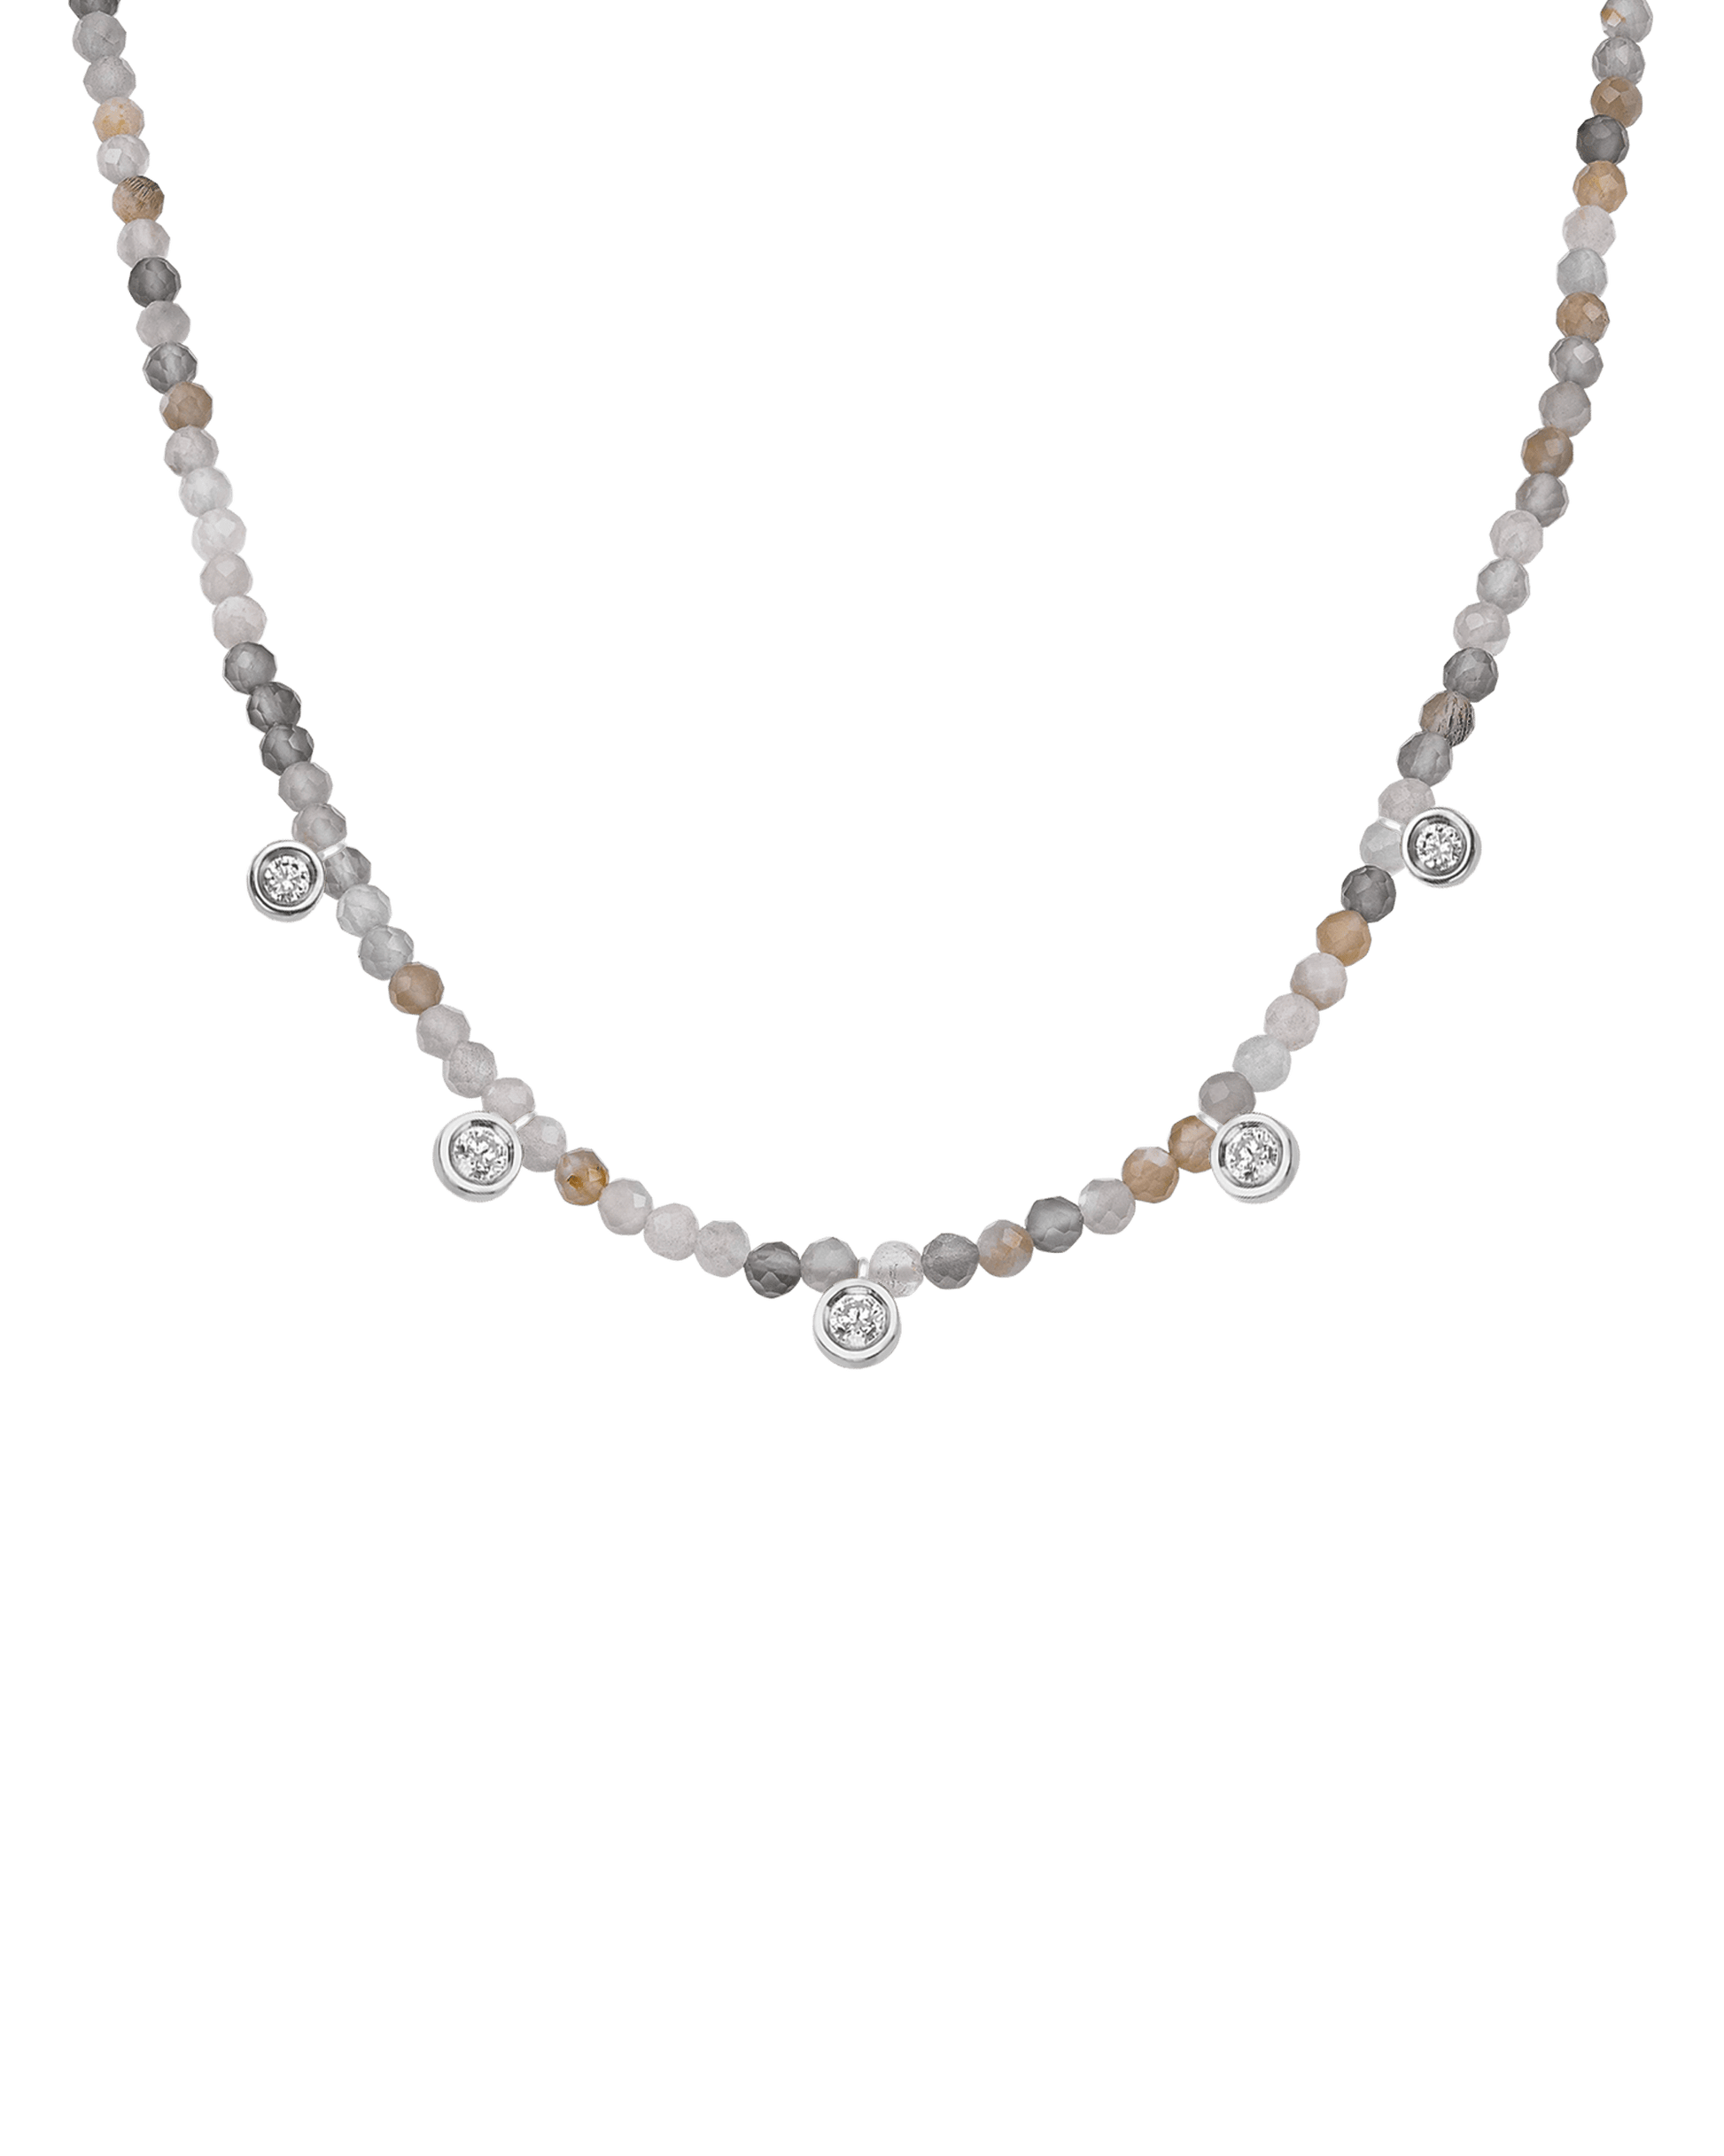 Emerald Gemstone & Five diamonds Necklace - 14K White Gold Necklaces magal-dev Natural Moonstone 14" - Collar 